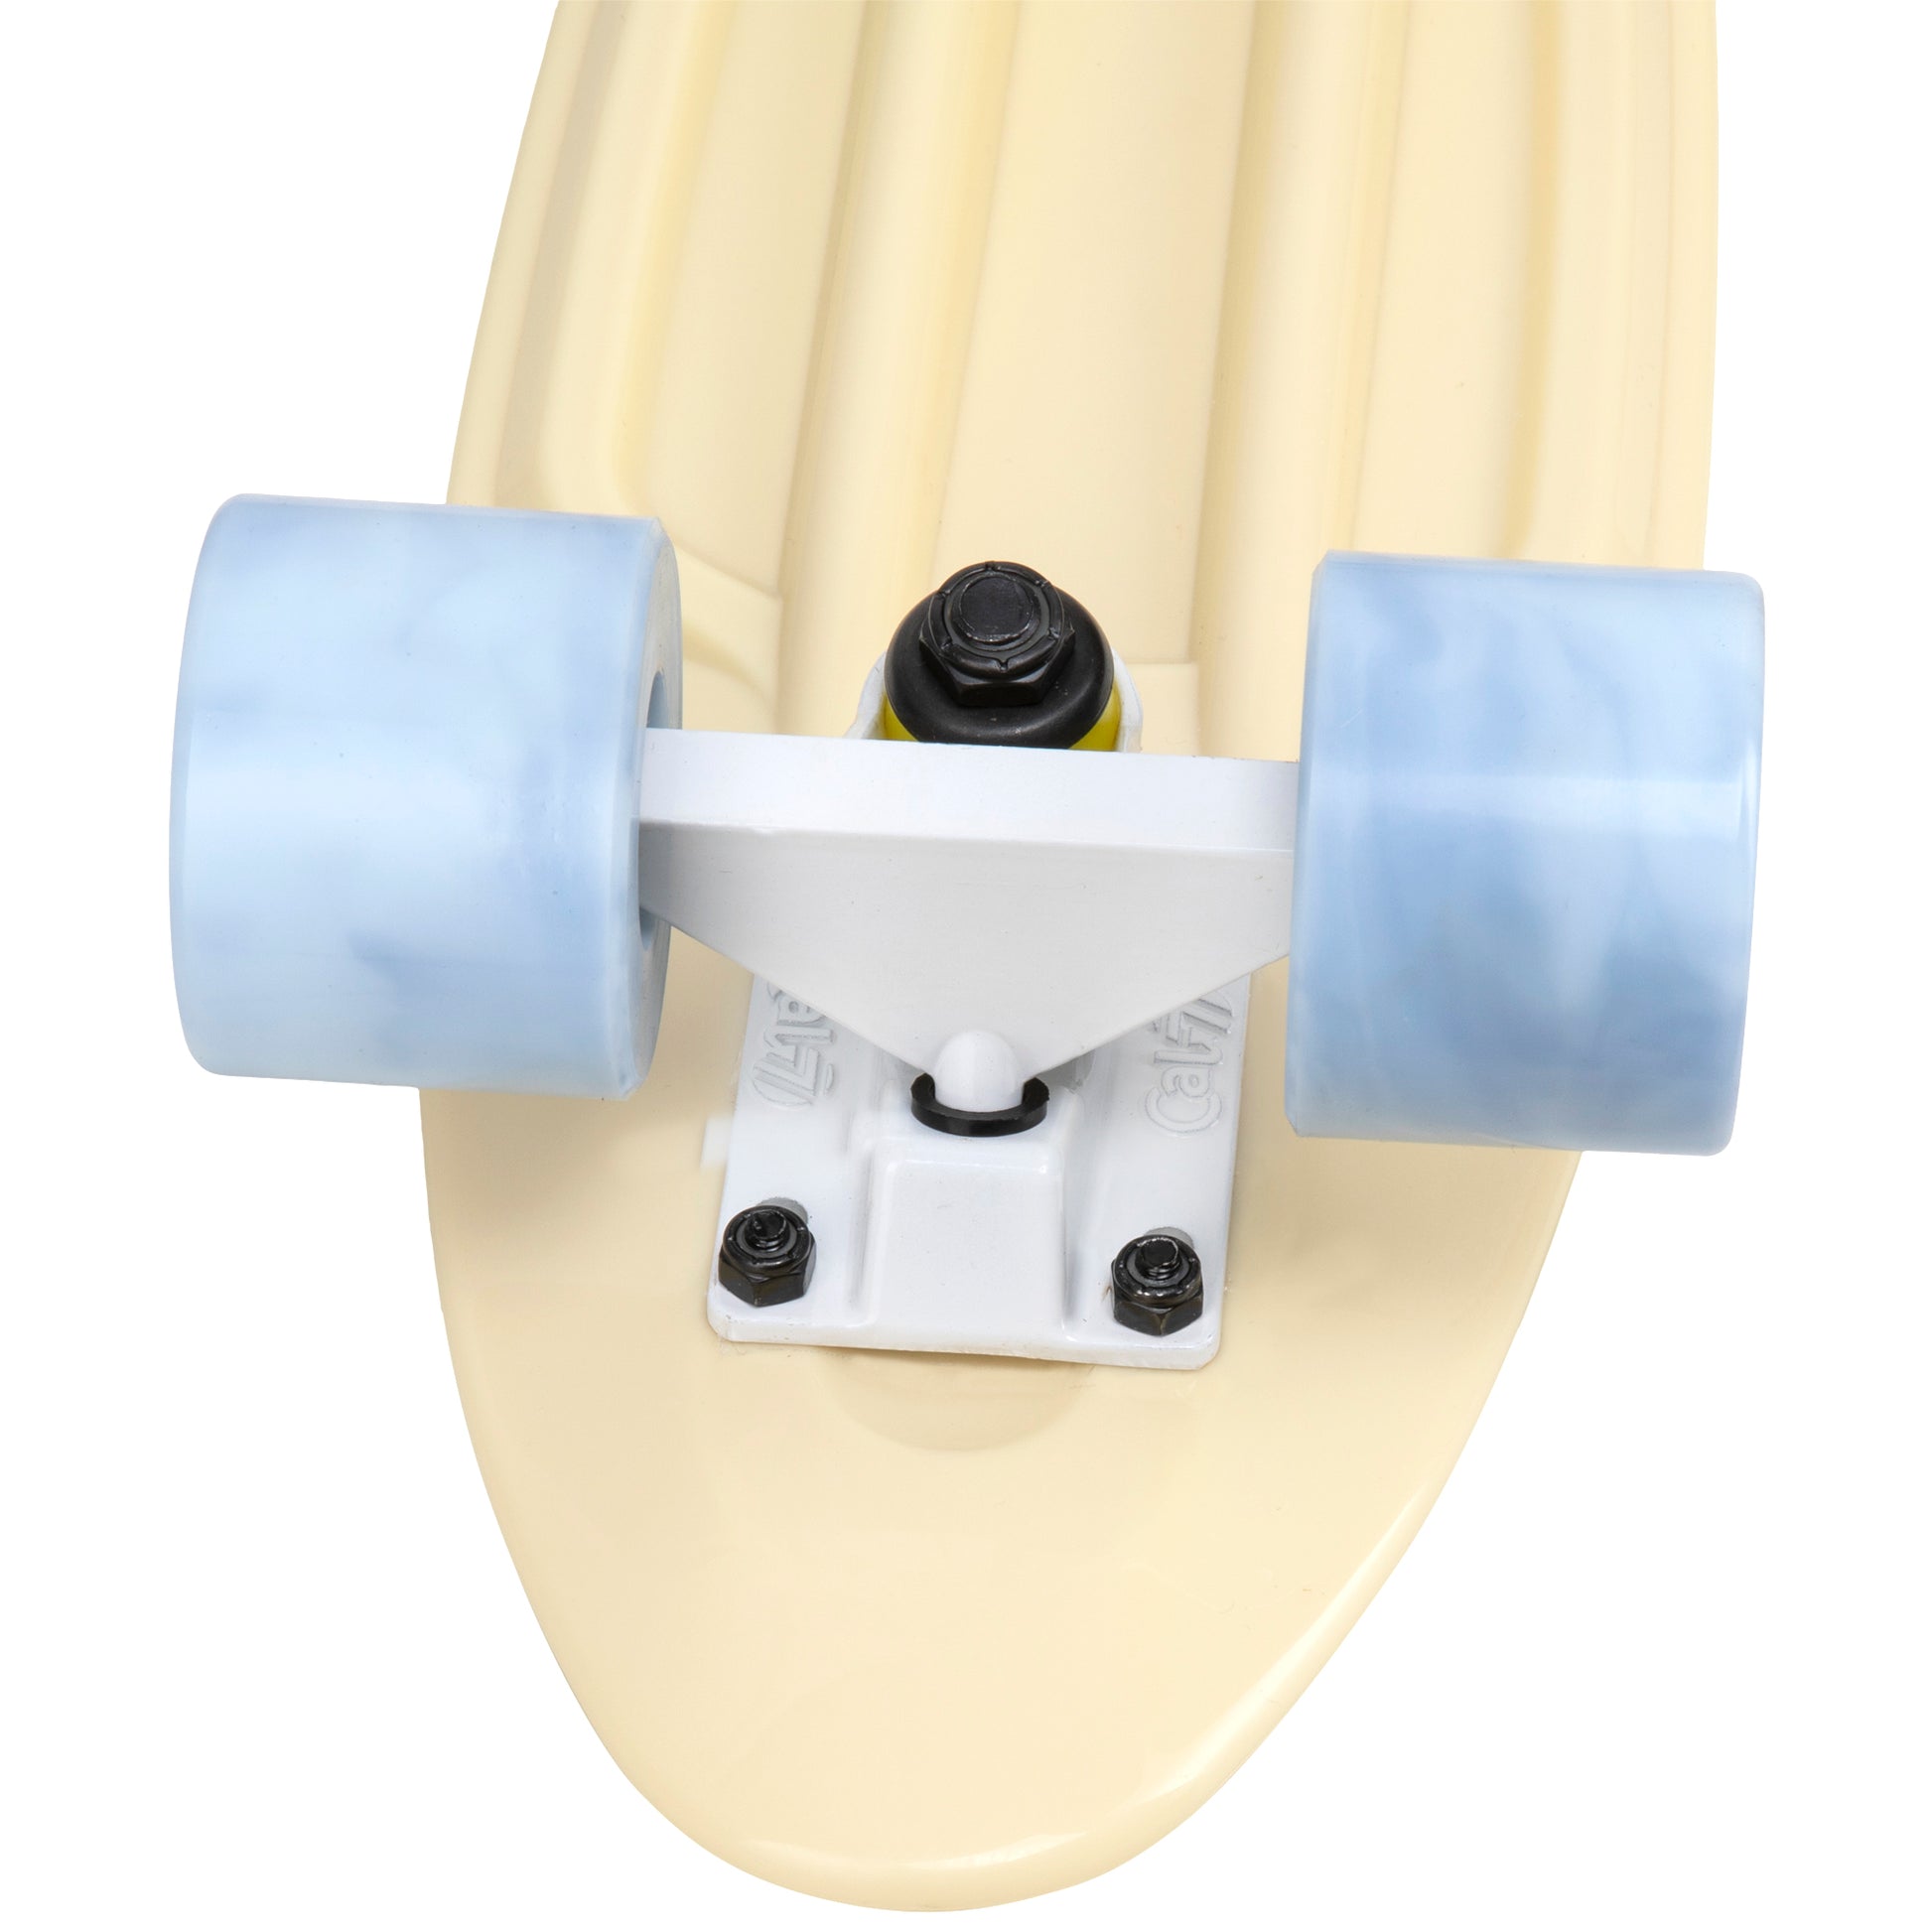 Cal 7 Snowdrop 22.5” Mini Cruiser with Swirl Wheels - featuring a pastel yellow plastic deck with 78A grey swirl wheels. 